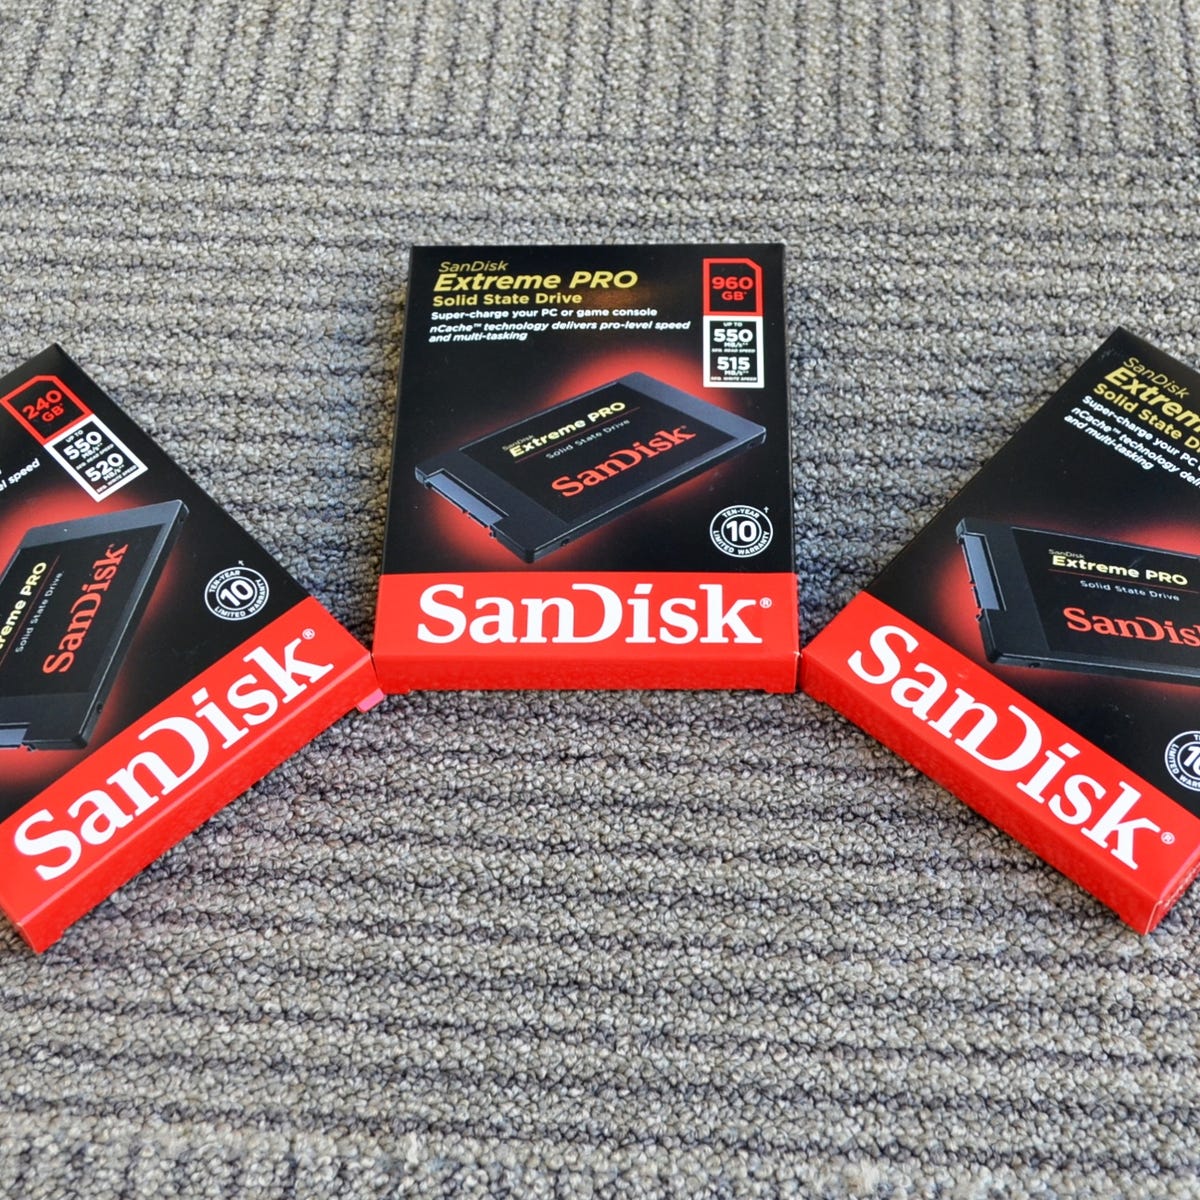 SanDisk Extreme Pro SSD review: Top performance backed by longest warranty  - CNET